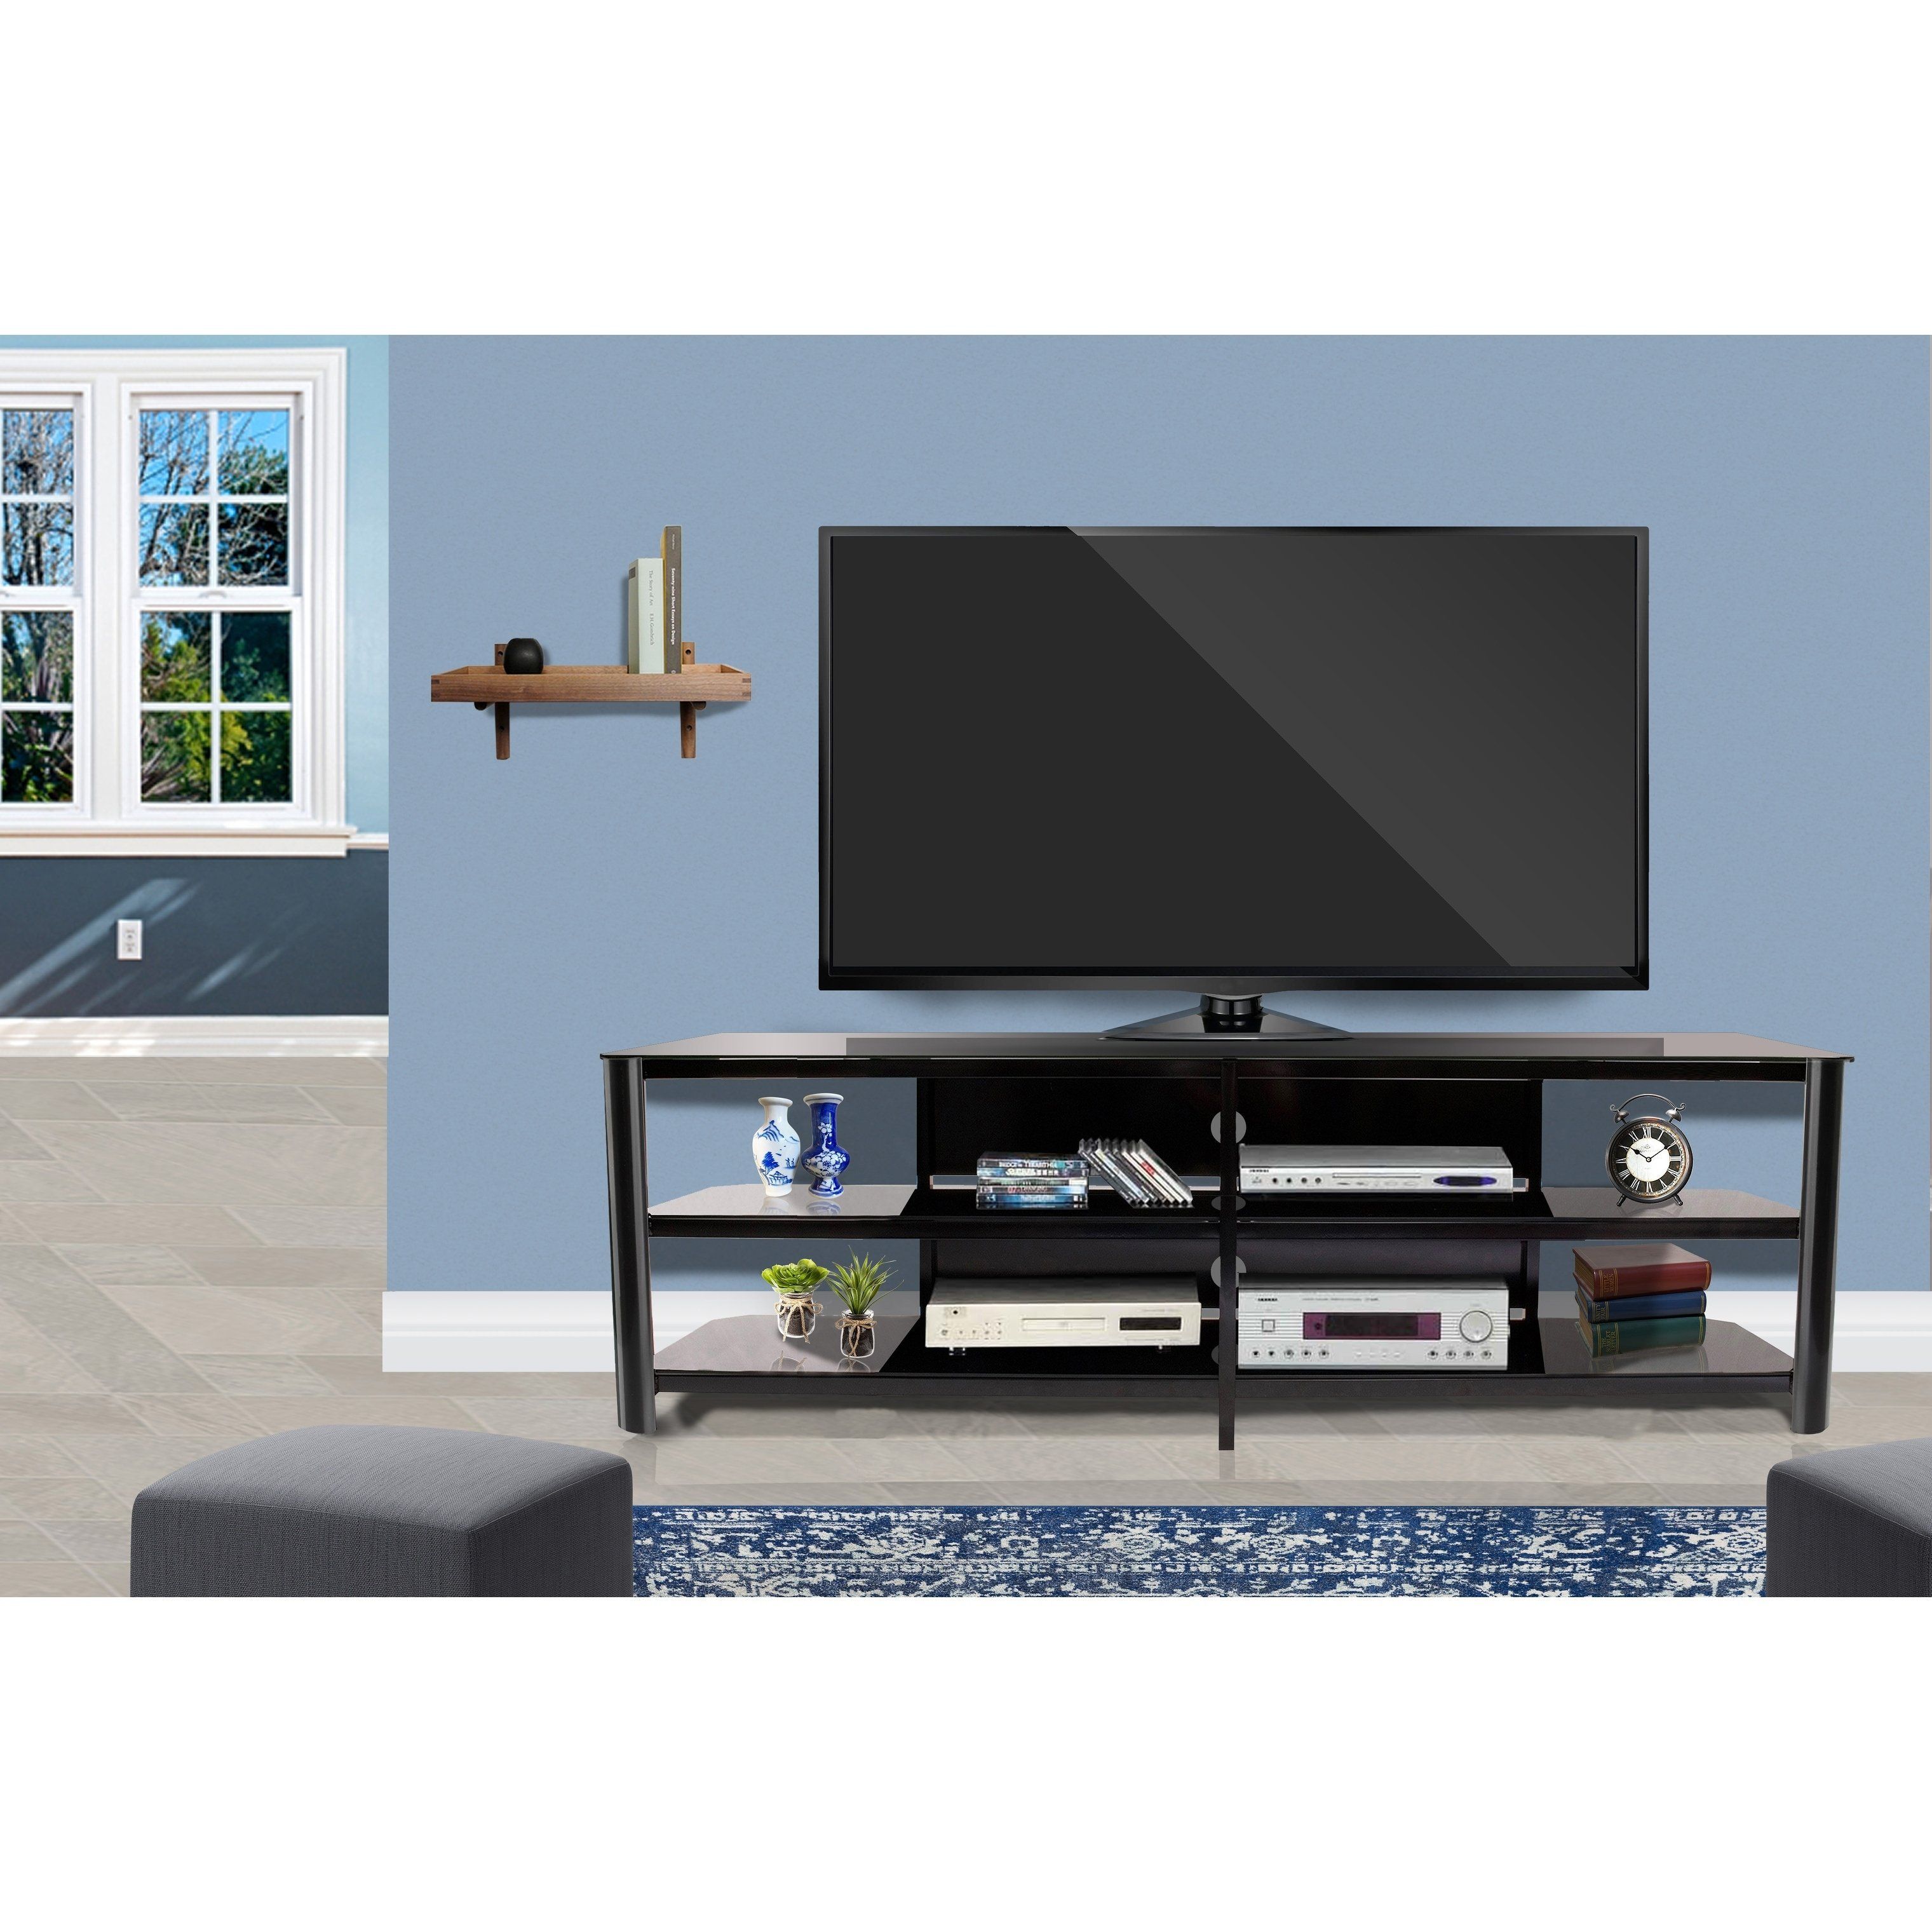 Shop Fold 'n' Snap Oxford Ez Black Innovex Tv Stand – Free Shipping For Oxford 60 Inch Tv Stands (View 19 of 30)